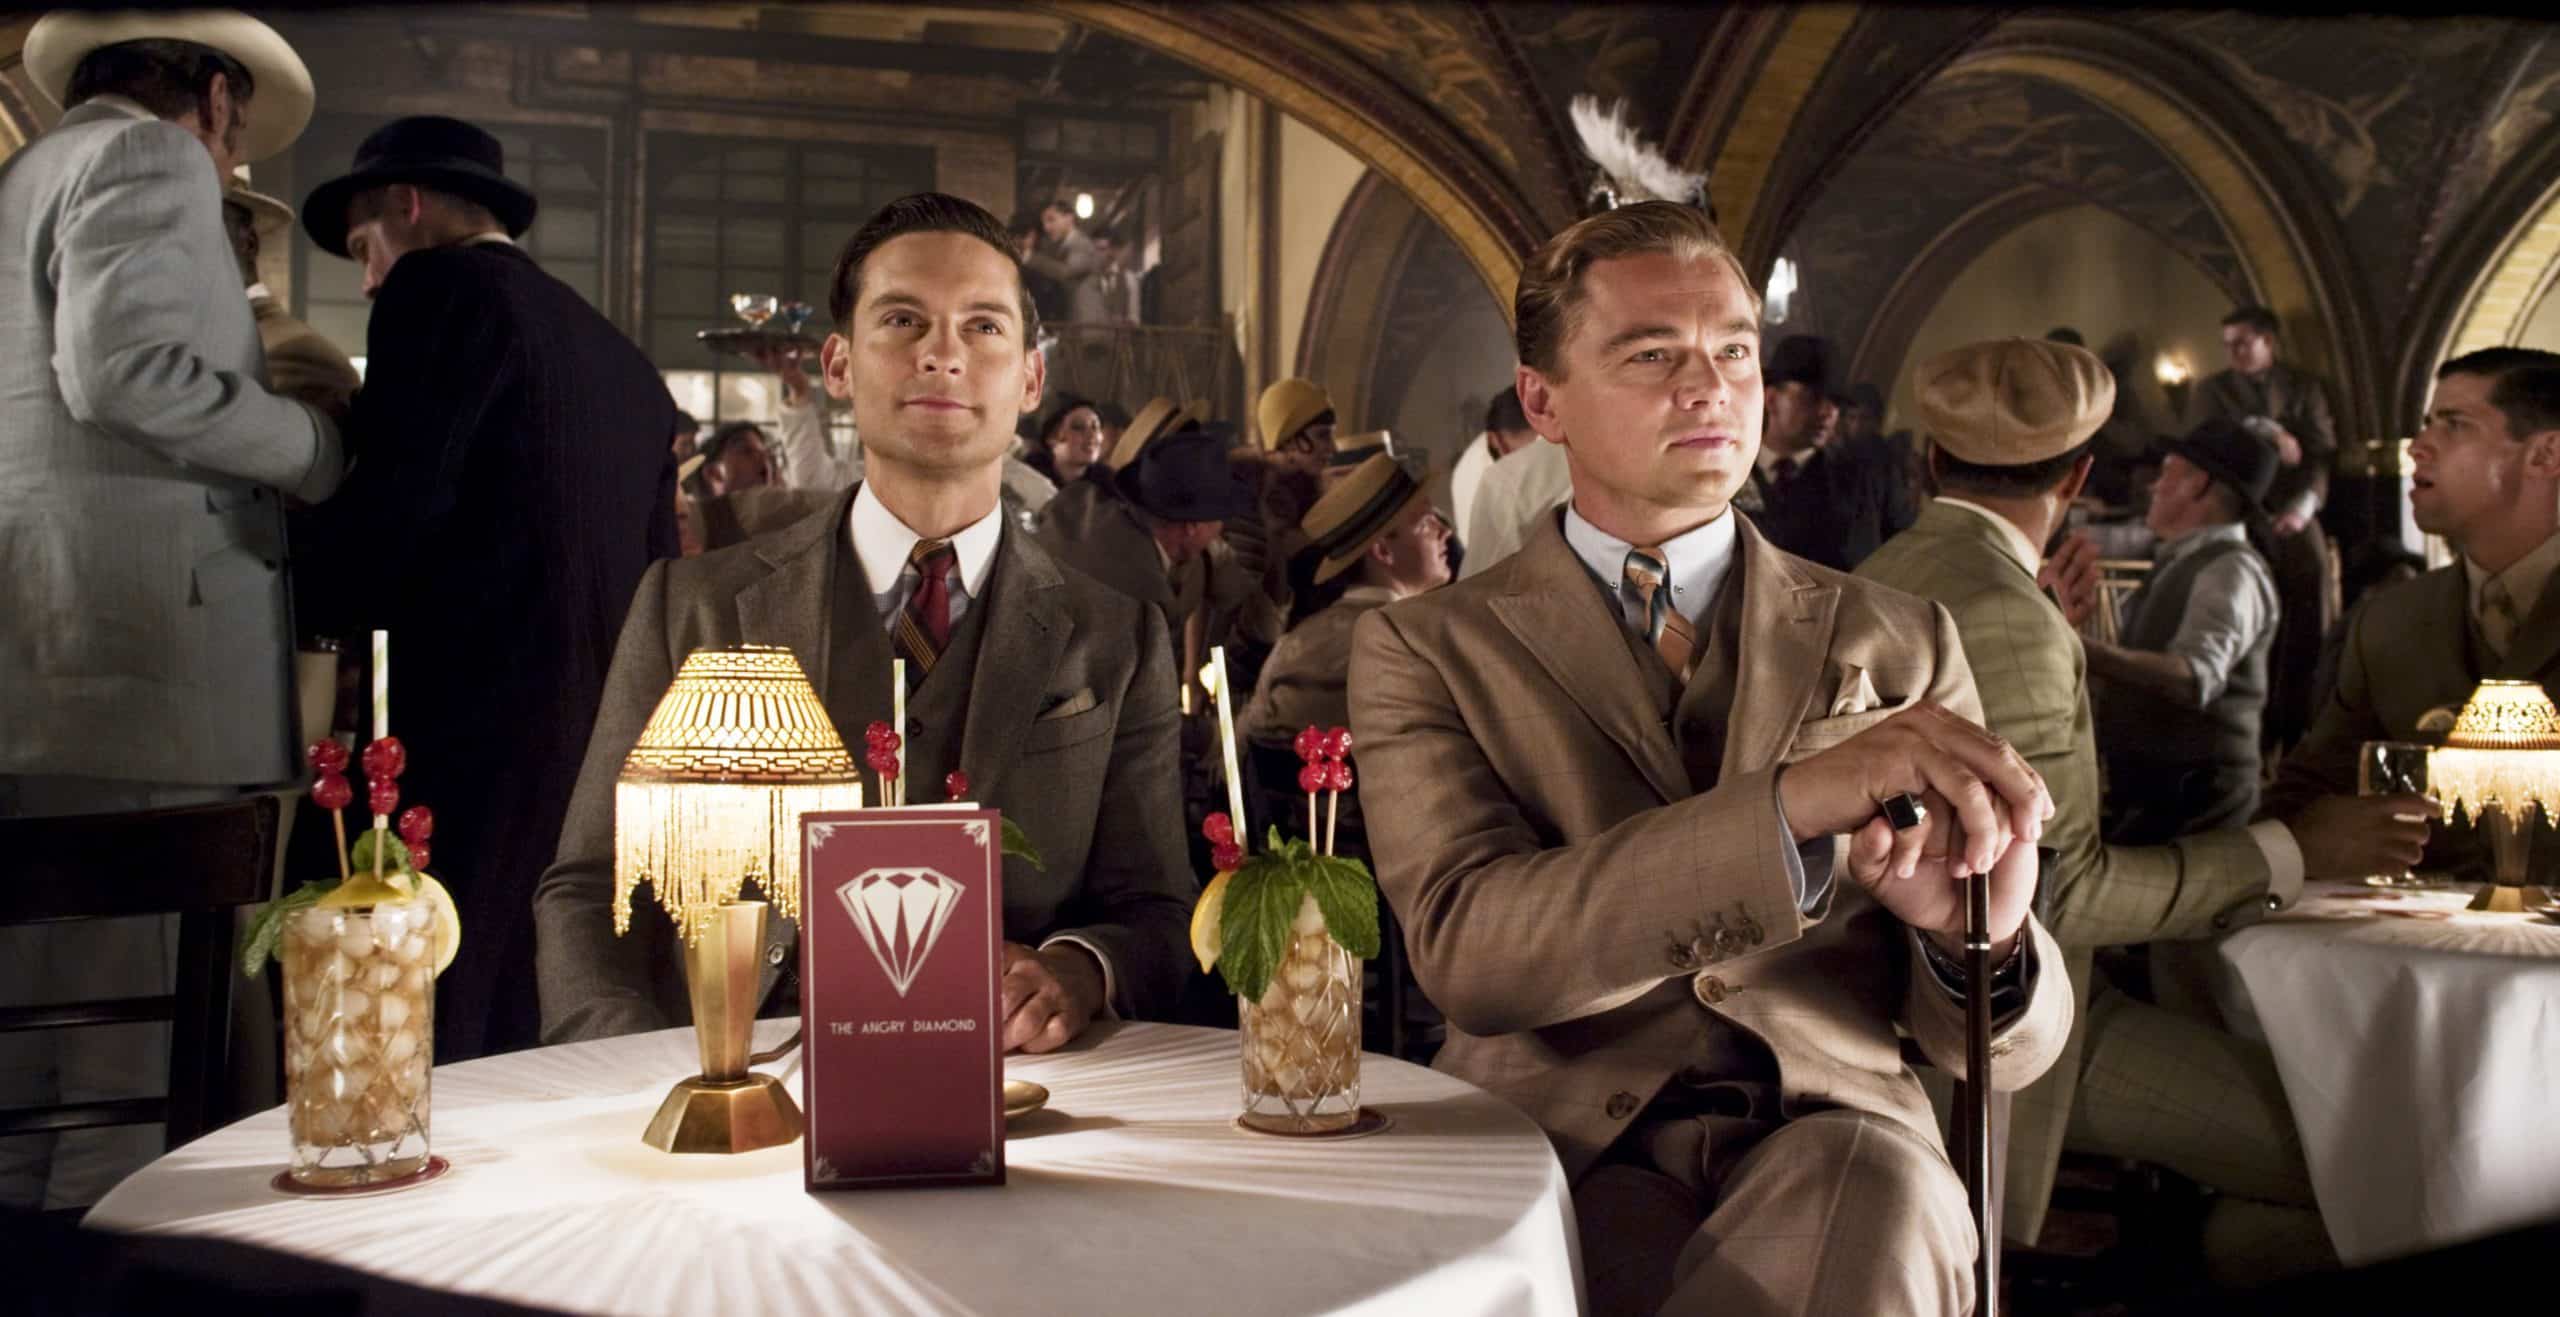 THE GREAT GATSBY, from left: Amitabh Bachchan (standing, far left), Tobey Maguire, Leonardo Di Caprio as Jay Gatsby, 2013